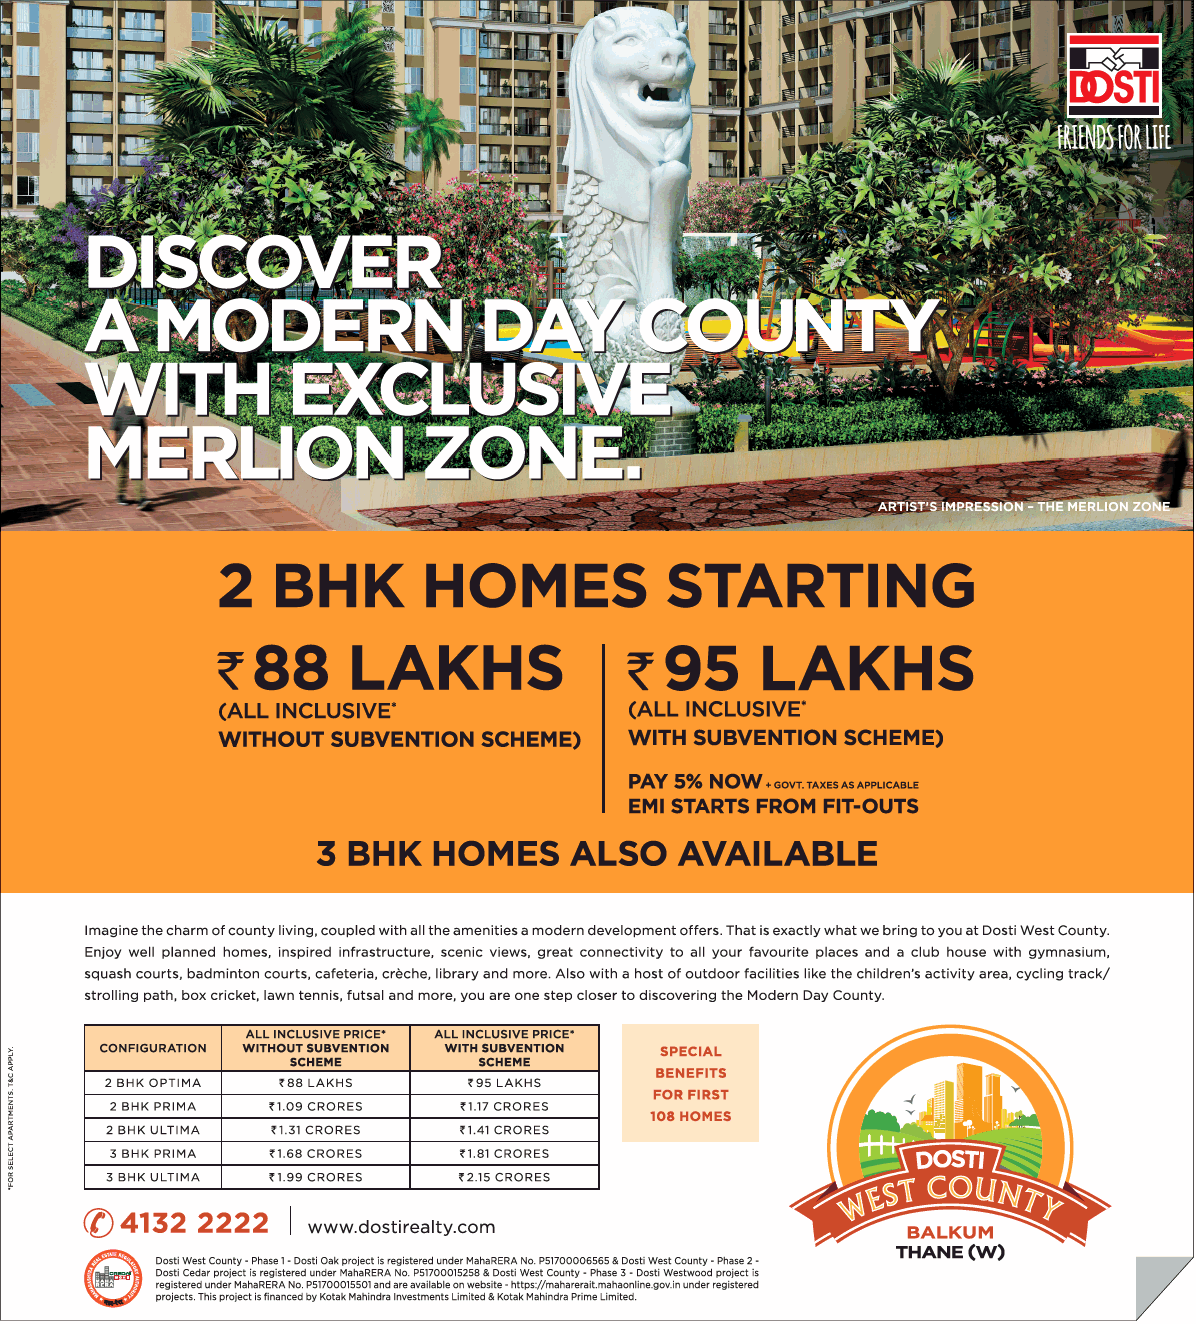 Dosti Discover A Modern Day County With Exclusive Merlion Zone Ad ...